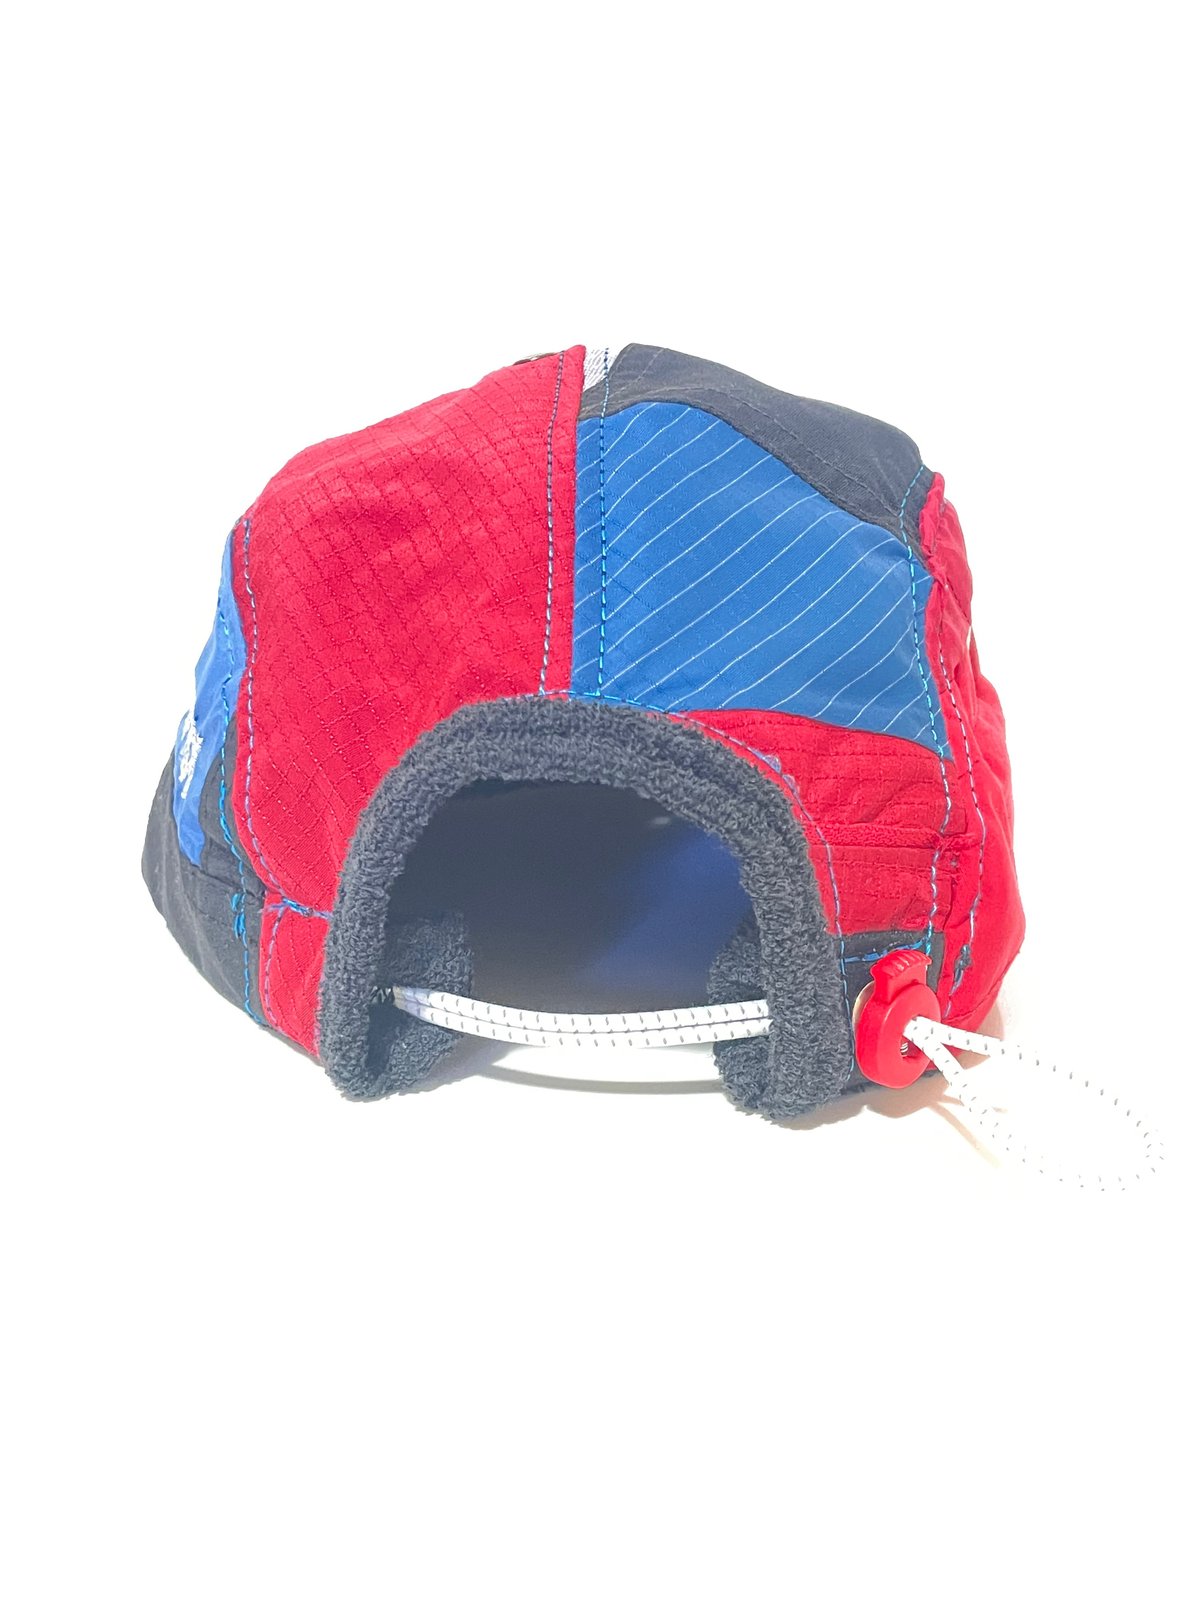 Upcycled North Face Red Blue Goretex 1 of 1 5-Panel